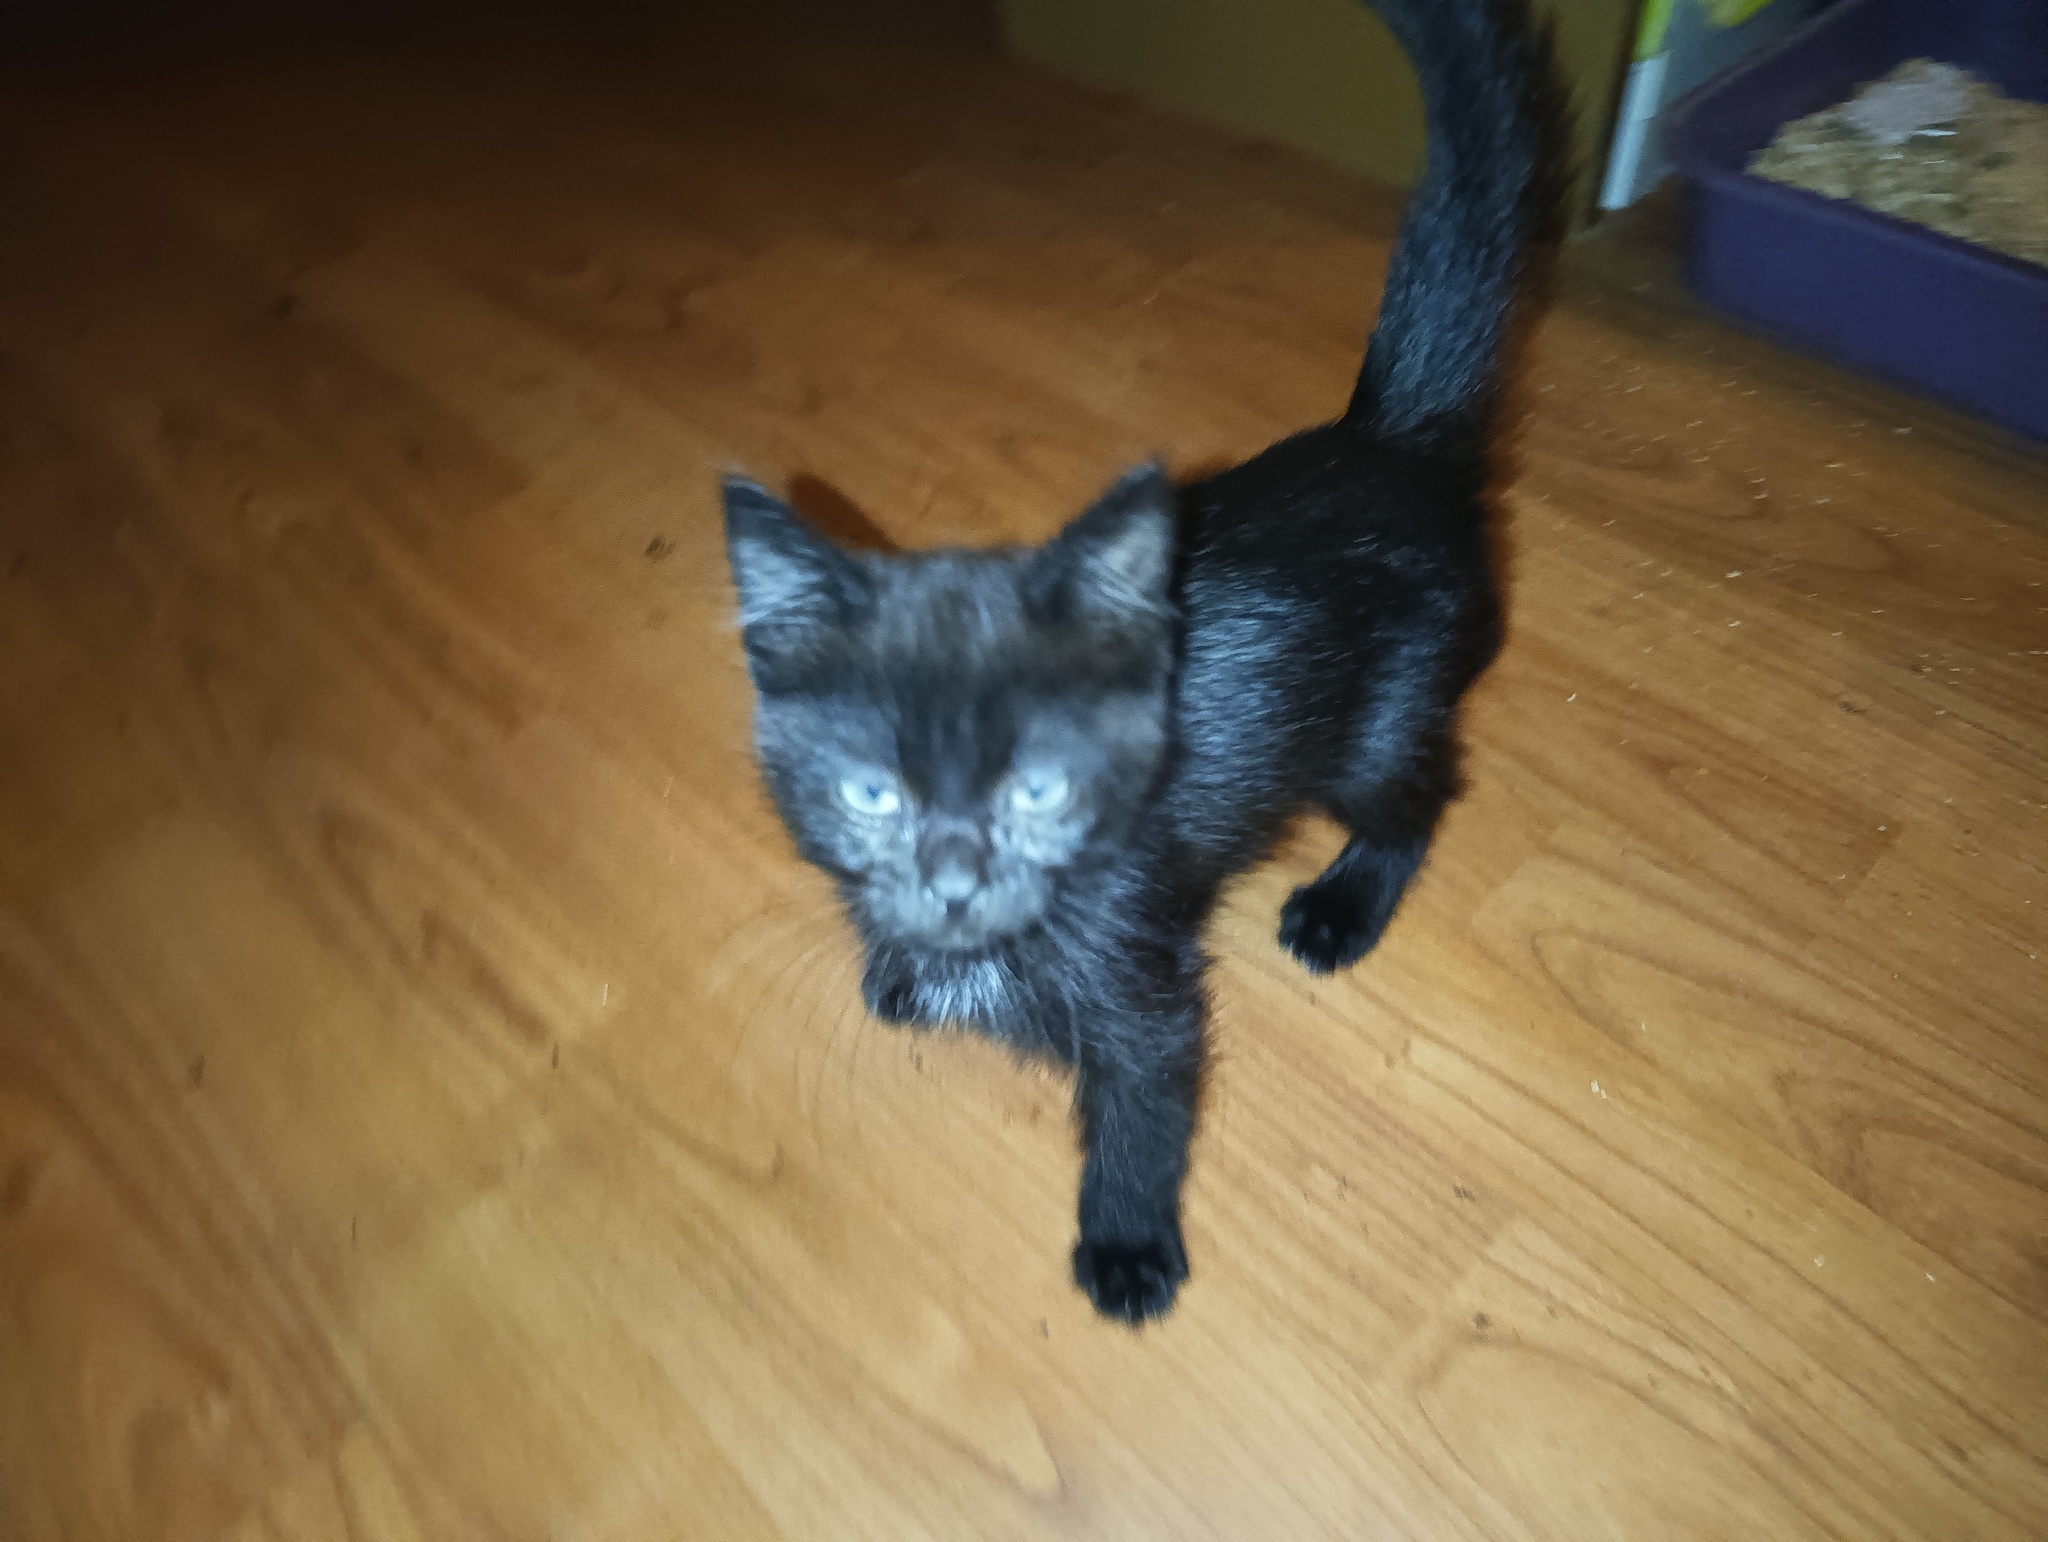 Kitten needs a home - Kittens, Pets, Animal shelter, In good hands, Black cat, Help, Helping animals, Longpost, No rating